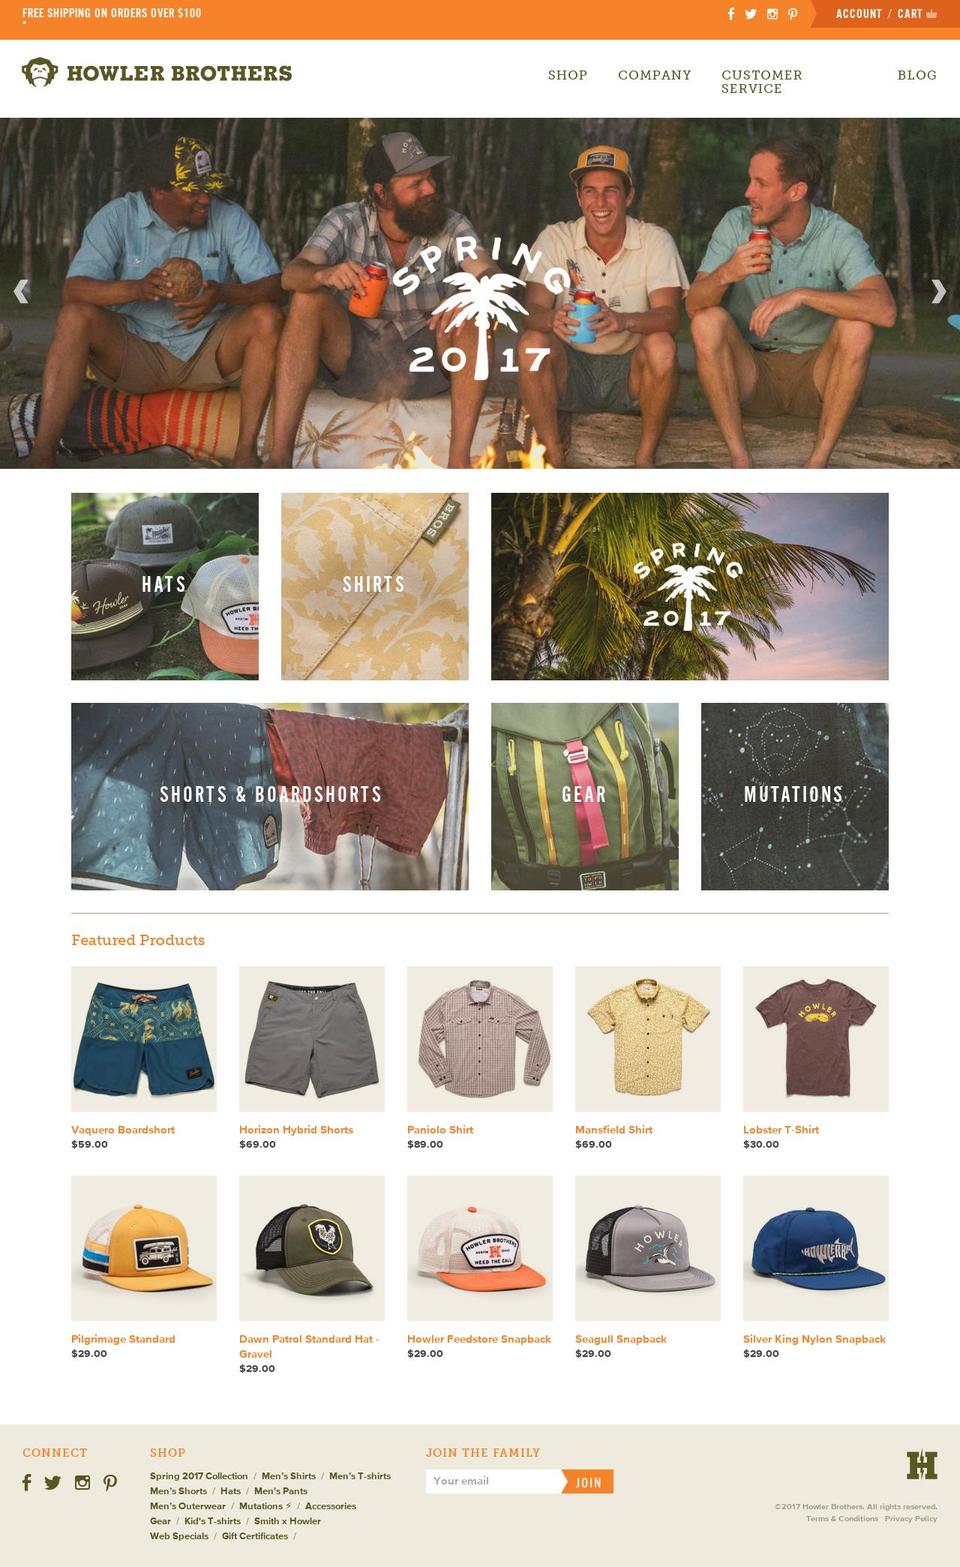 Production Shopify theme site example howlerbros.com